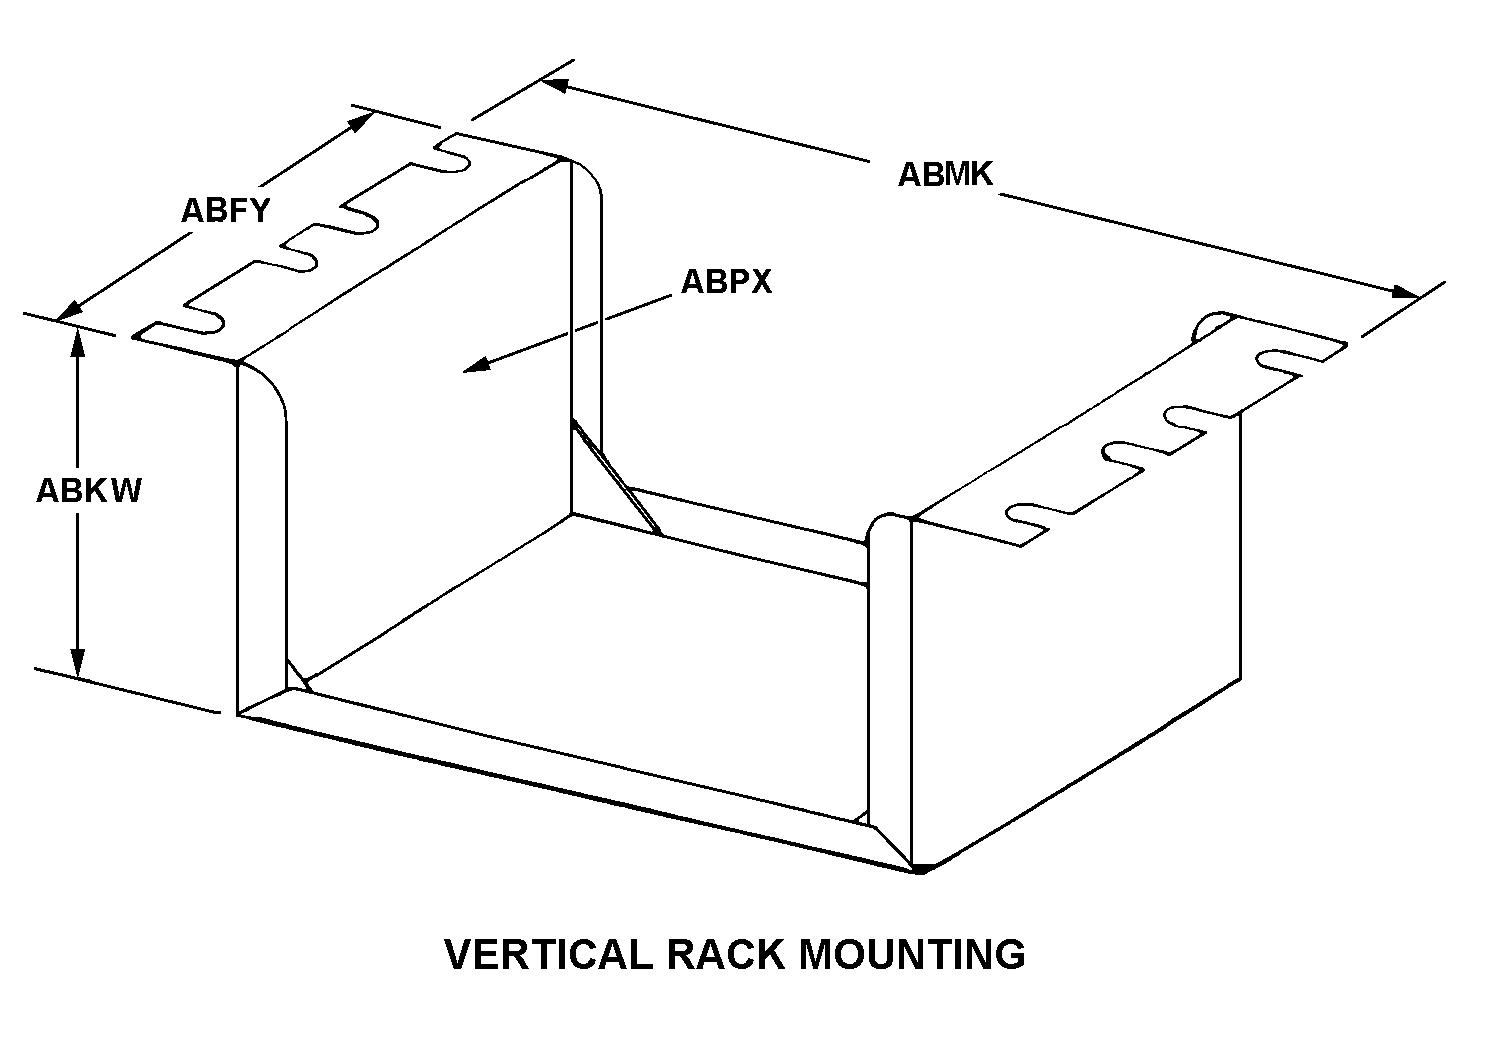 VERTICAL RACK MOUNTING style nsn 5975-01-471-1540